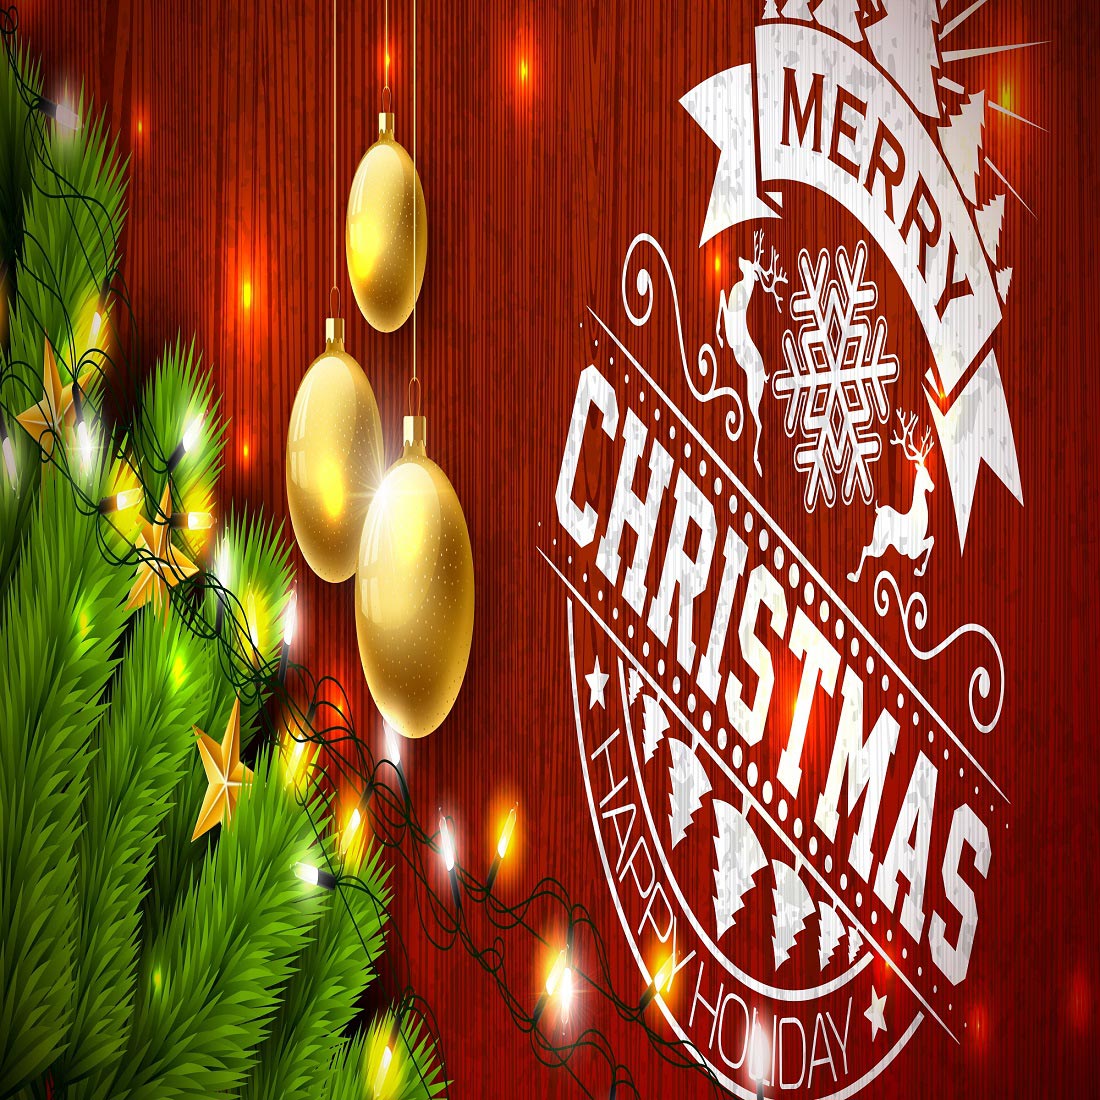 Merry Christmas happy new year design preview image.